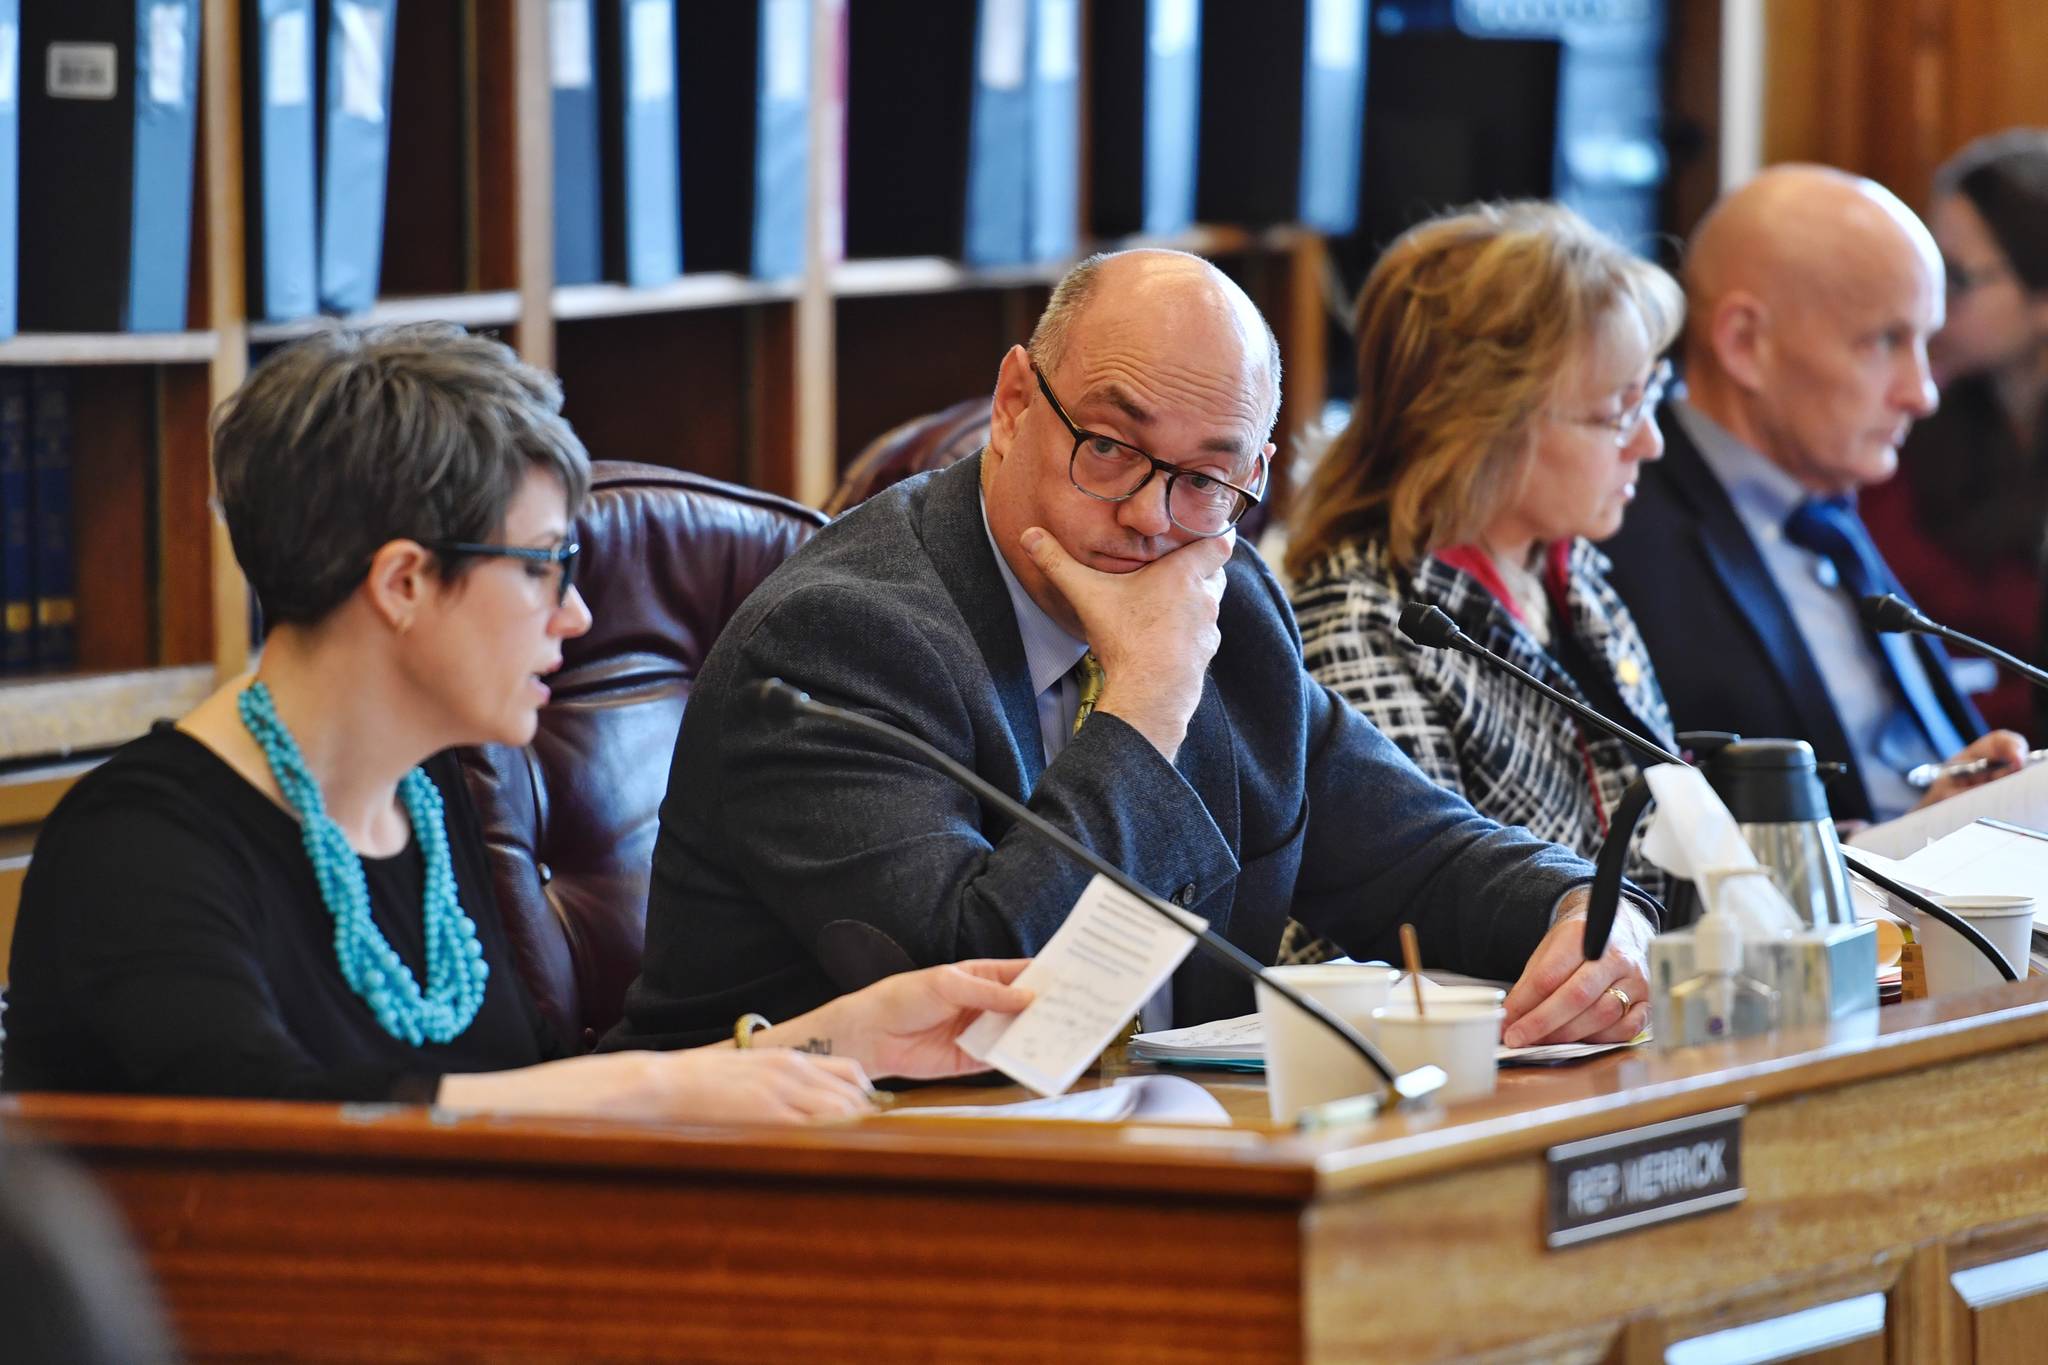 Rep. Andy Josephson, D-Anchorage, second from left, listens to Rep. Kelly Merrick, R-Eagle River, as she reads an amendment to repeal the Ocean Ranger program during a House Finance Committee meeting at the Capitol on Thursday, April 4, 2019. The Ocean Ranger program was approved through a voter ballot initiative in 2006. The amendment passed 8-3. (Michael Penn | Juneau Empire)